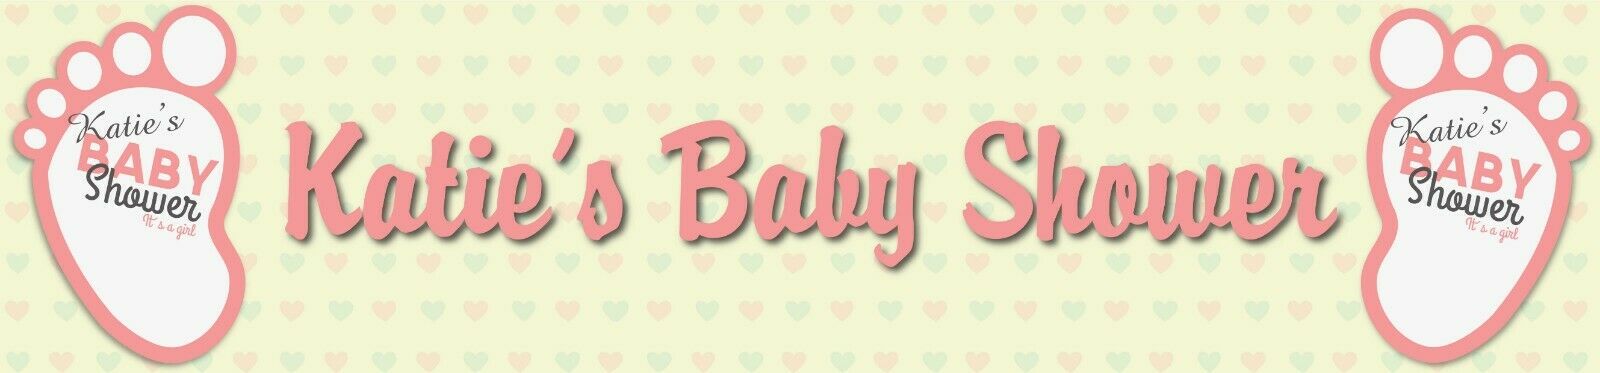 personalised banners - Baby Shower Banner